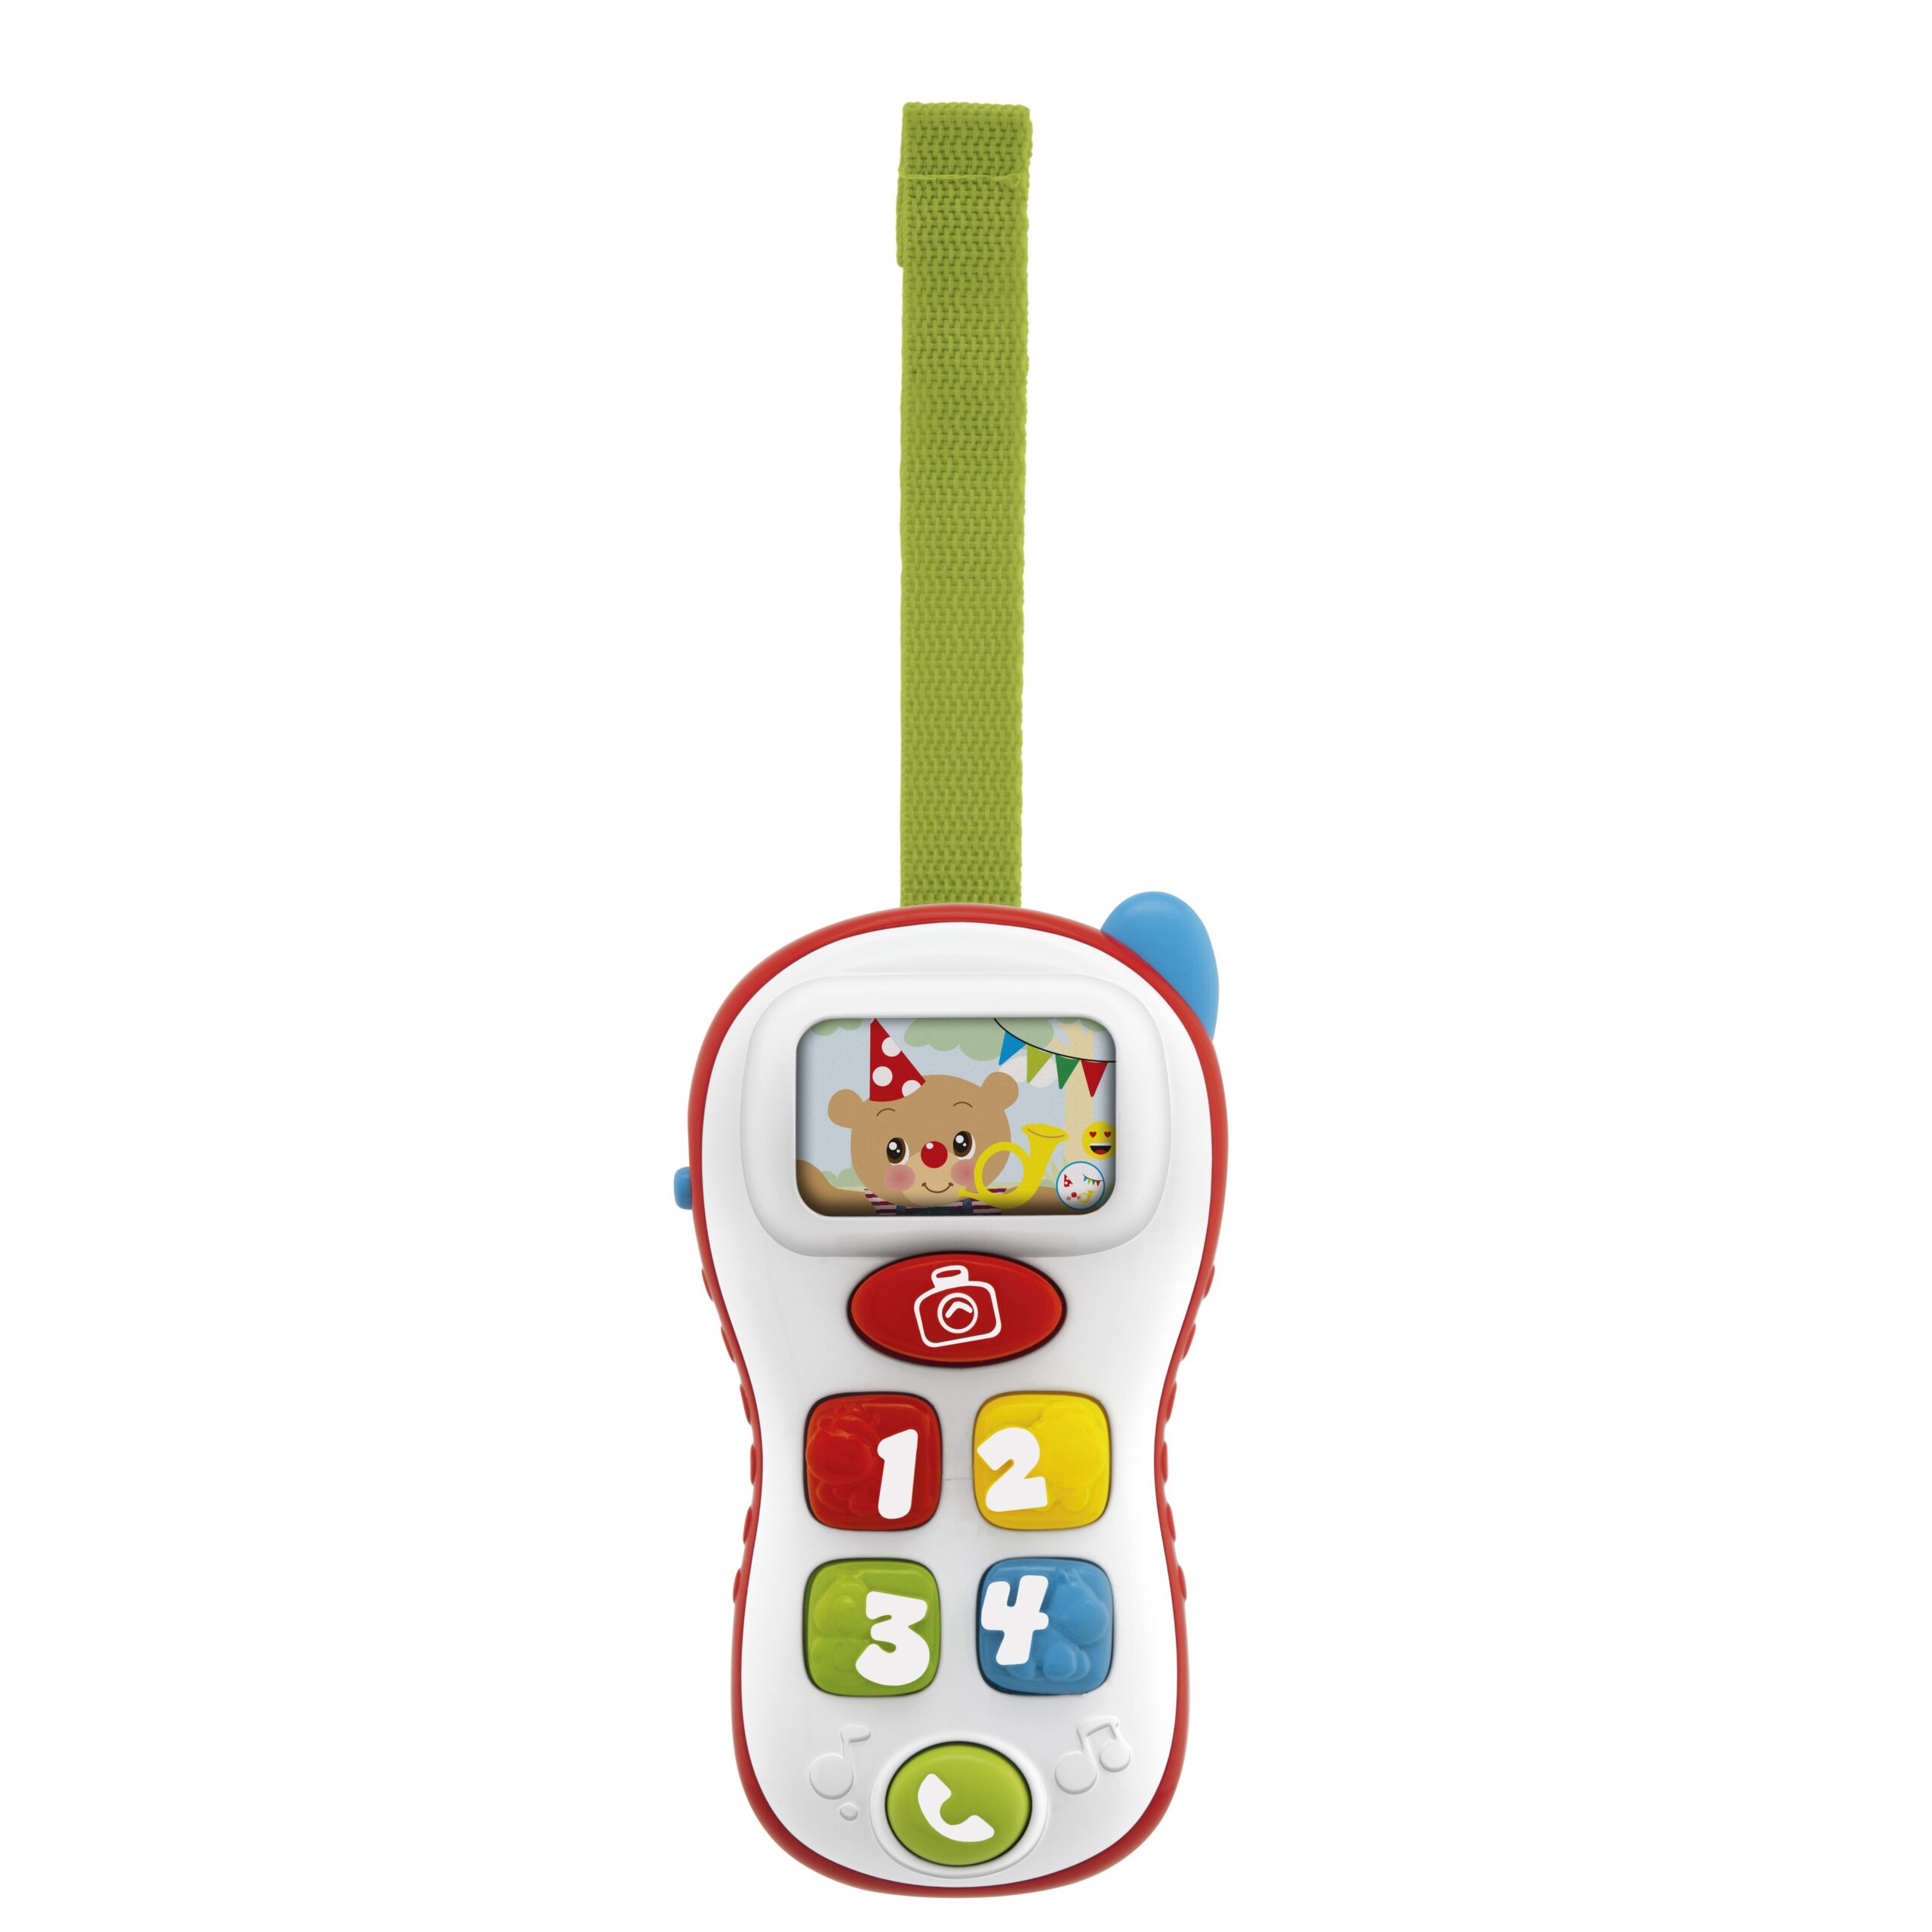 Abc selfie phone - chicco - toys center - Chicco